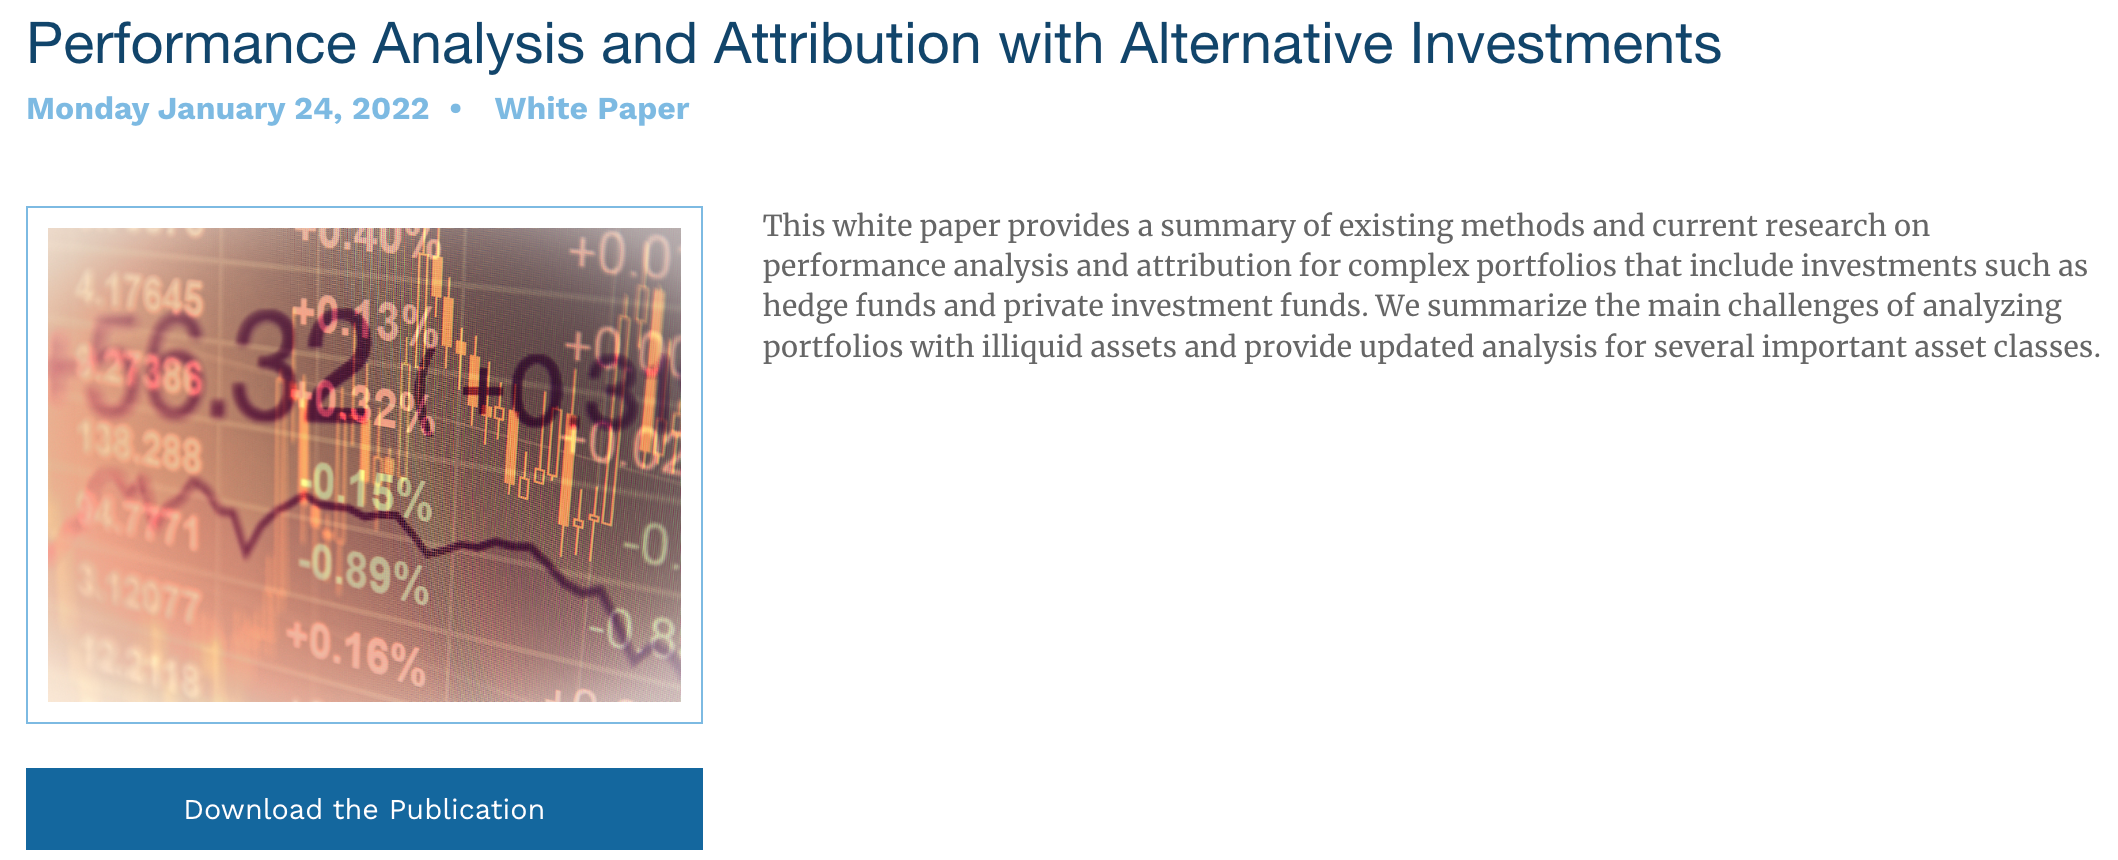 Deal-level Attribution Analysis for Private Equity